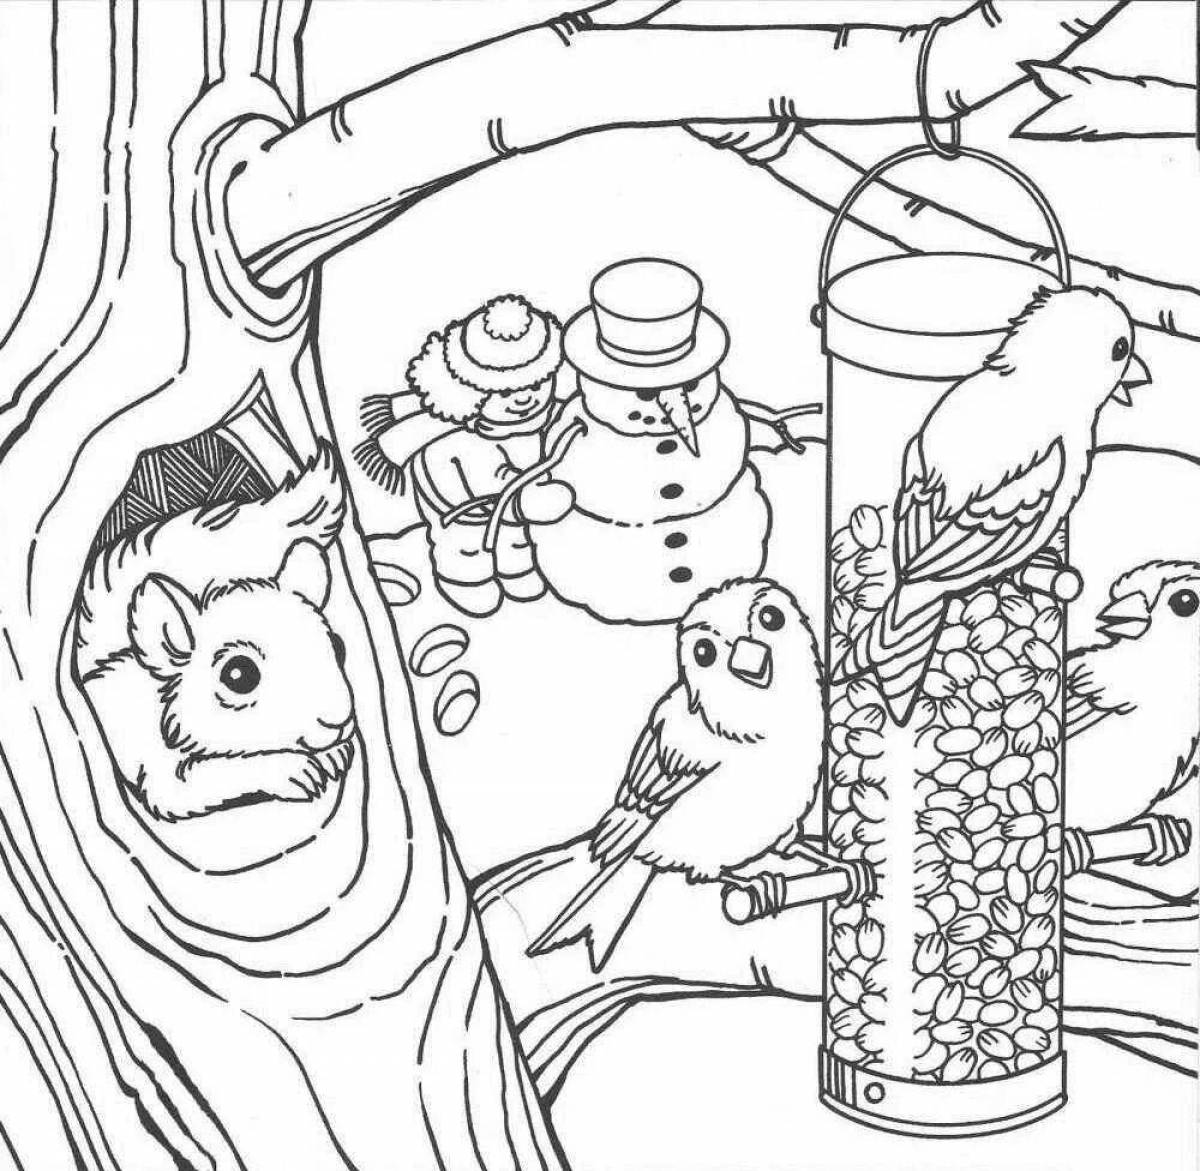 Feed the birds shiny coloring book